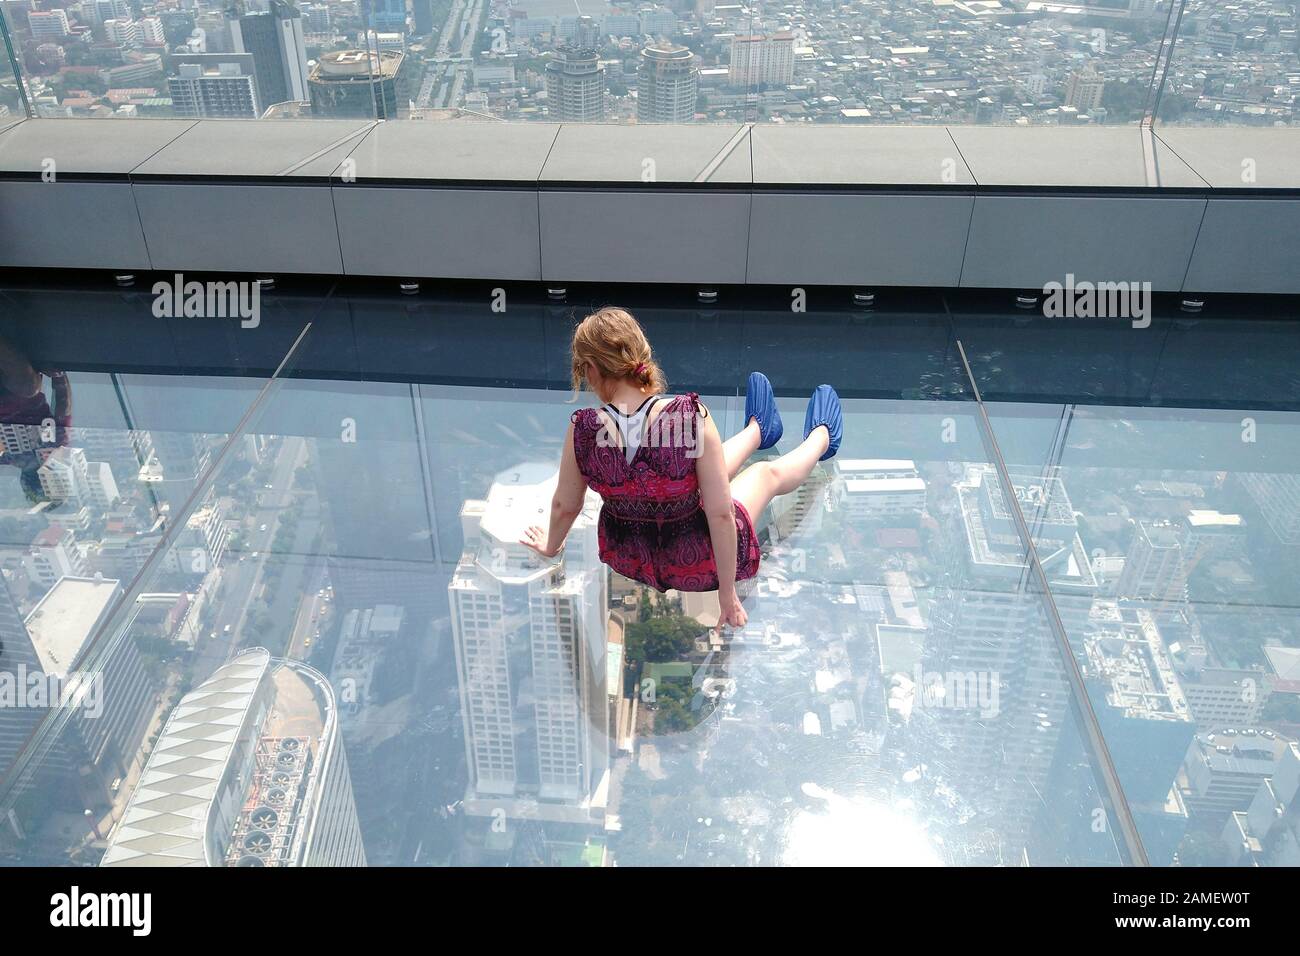 Bangkok, Thailand - December 21, 2019: Woman sitting on glass floor on rooftop of the King Power Mahanakhon building and looking down through glass. Stock Photo